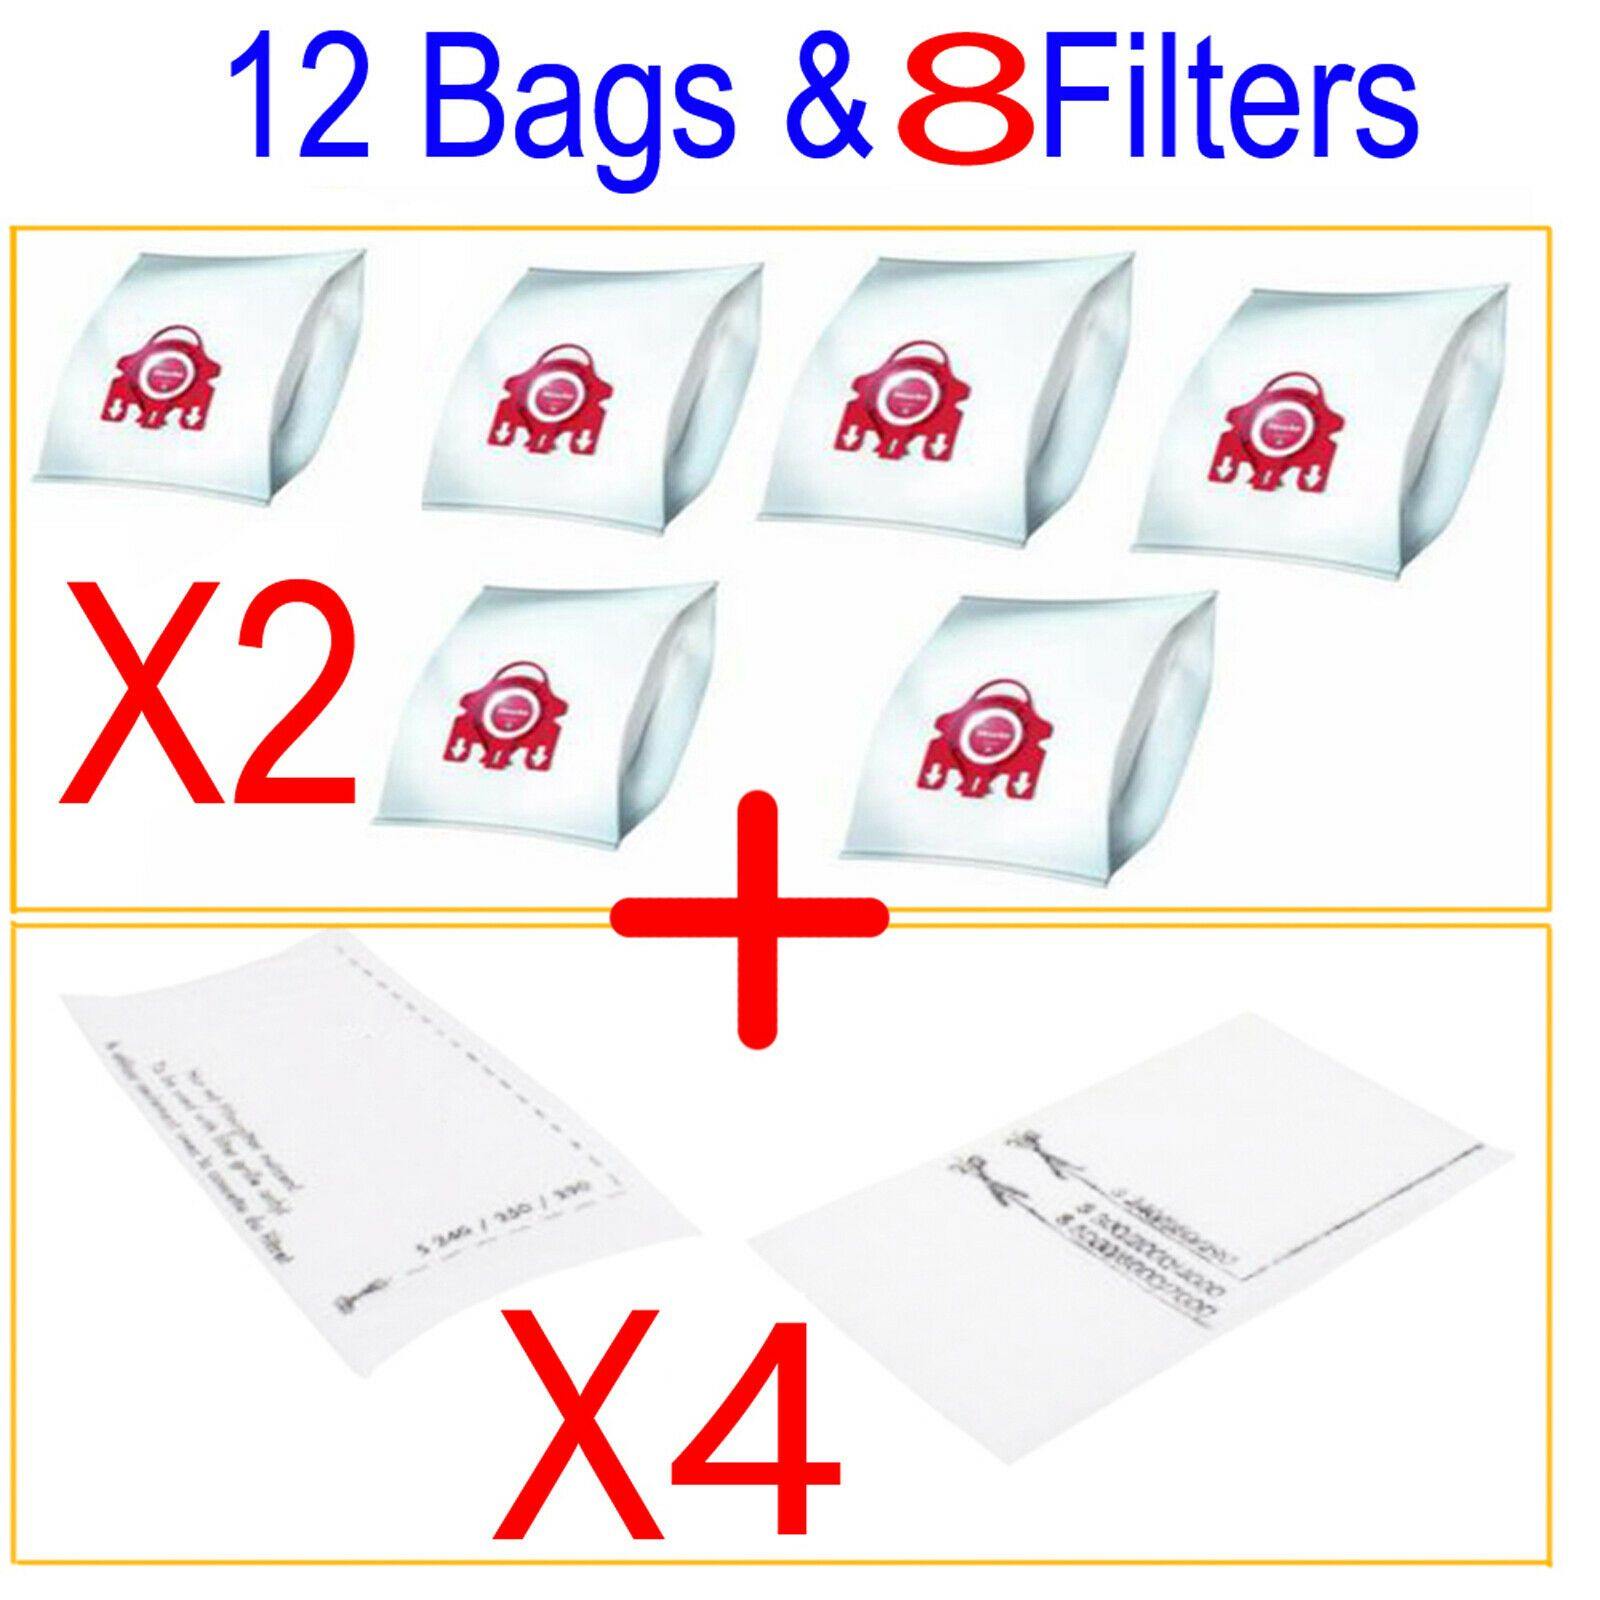 12 Synthetic Bags & 8 Filters For Miele S344 S381 S381i S386 S4210 Comfort Sparesbarn